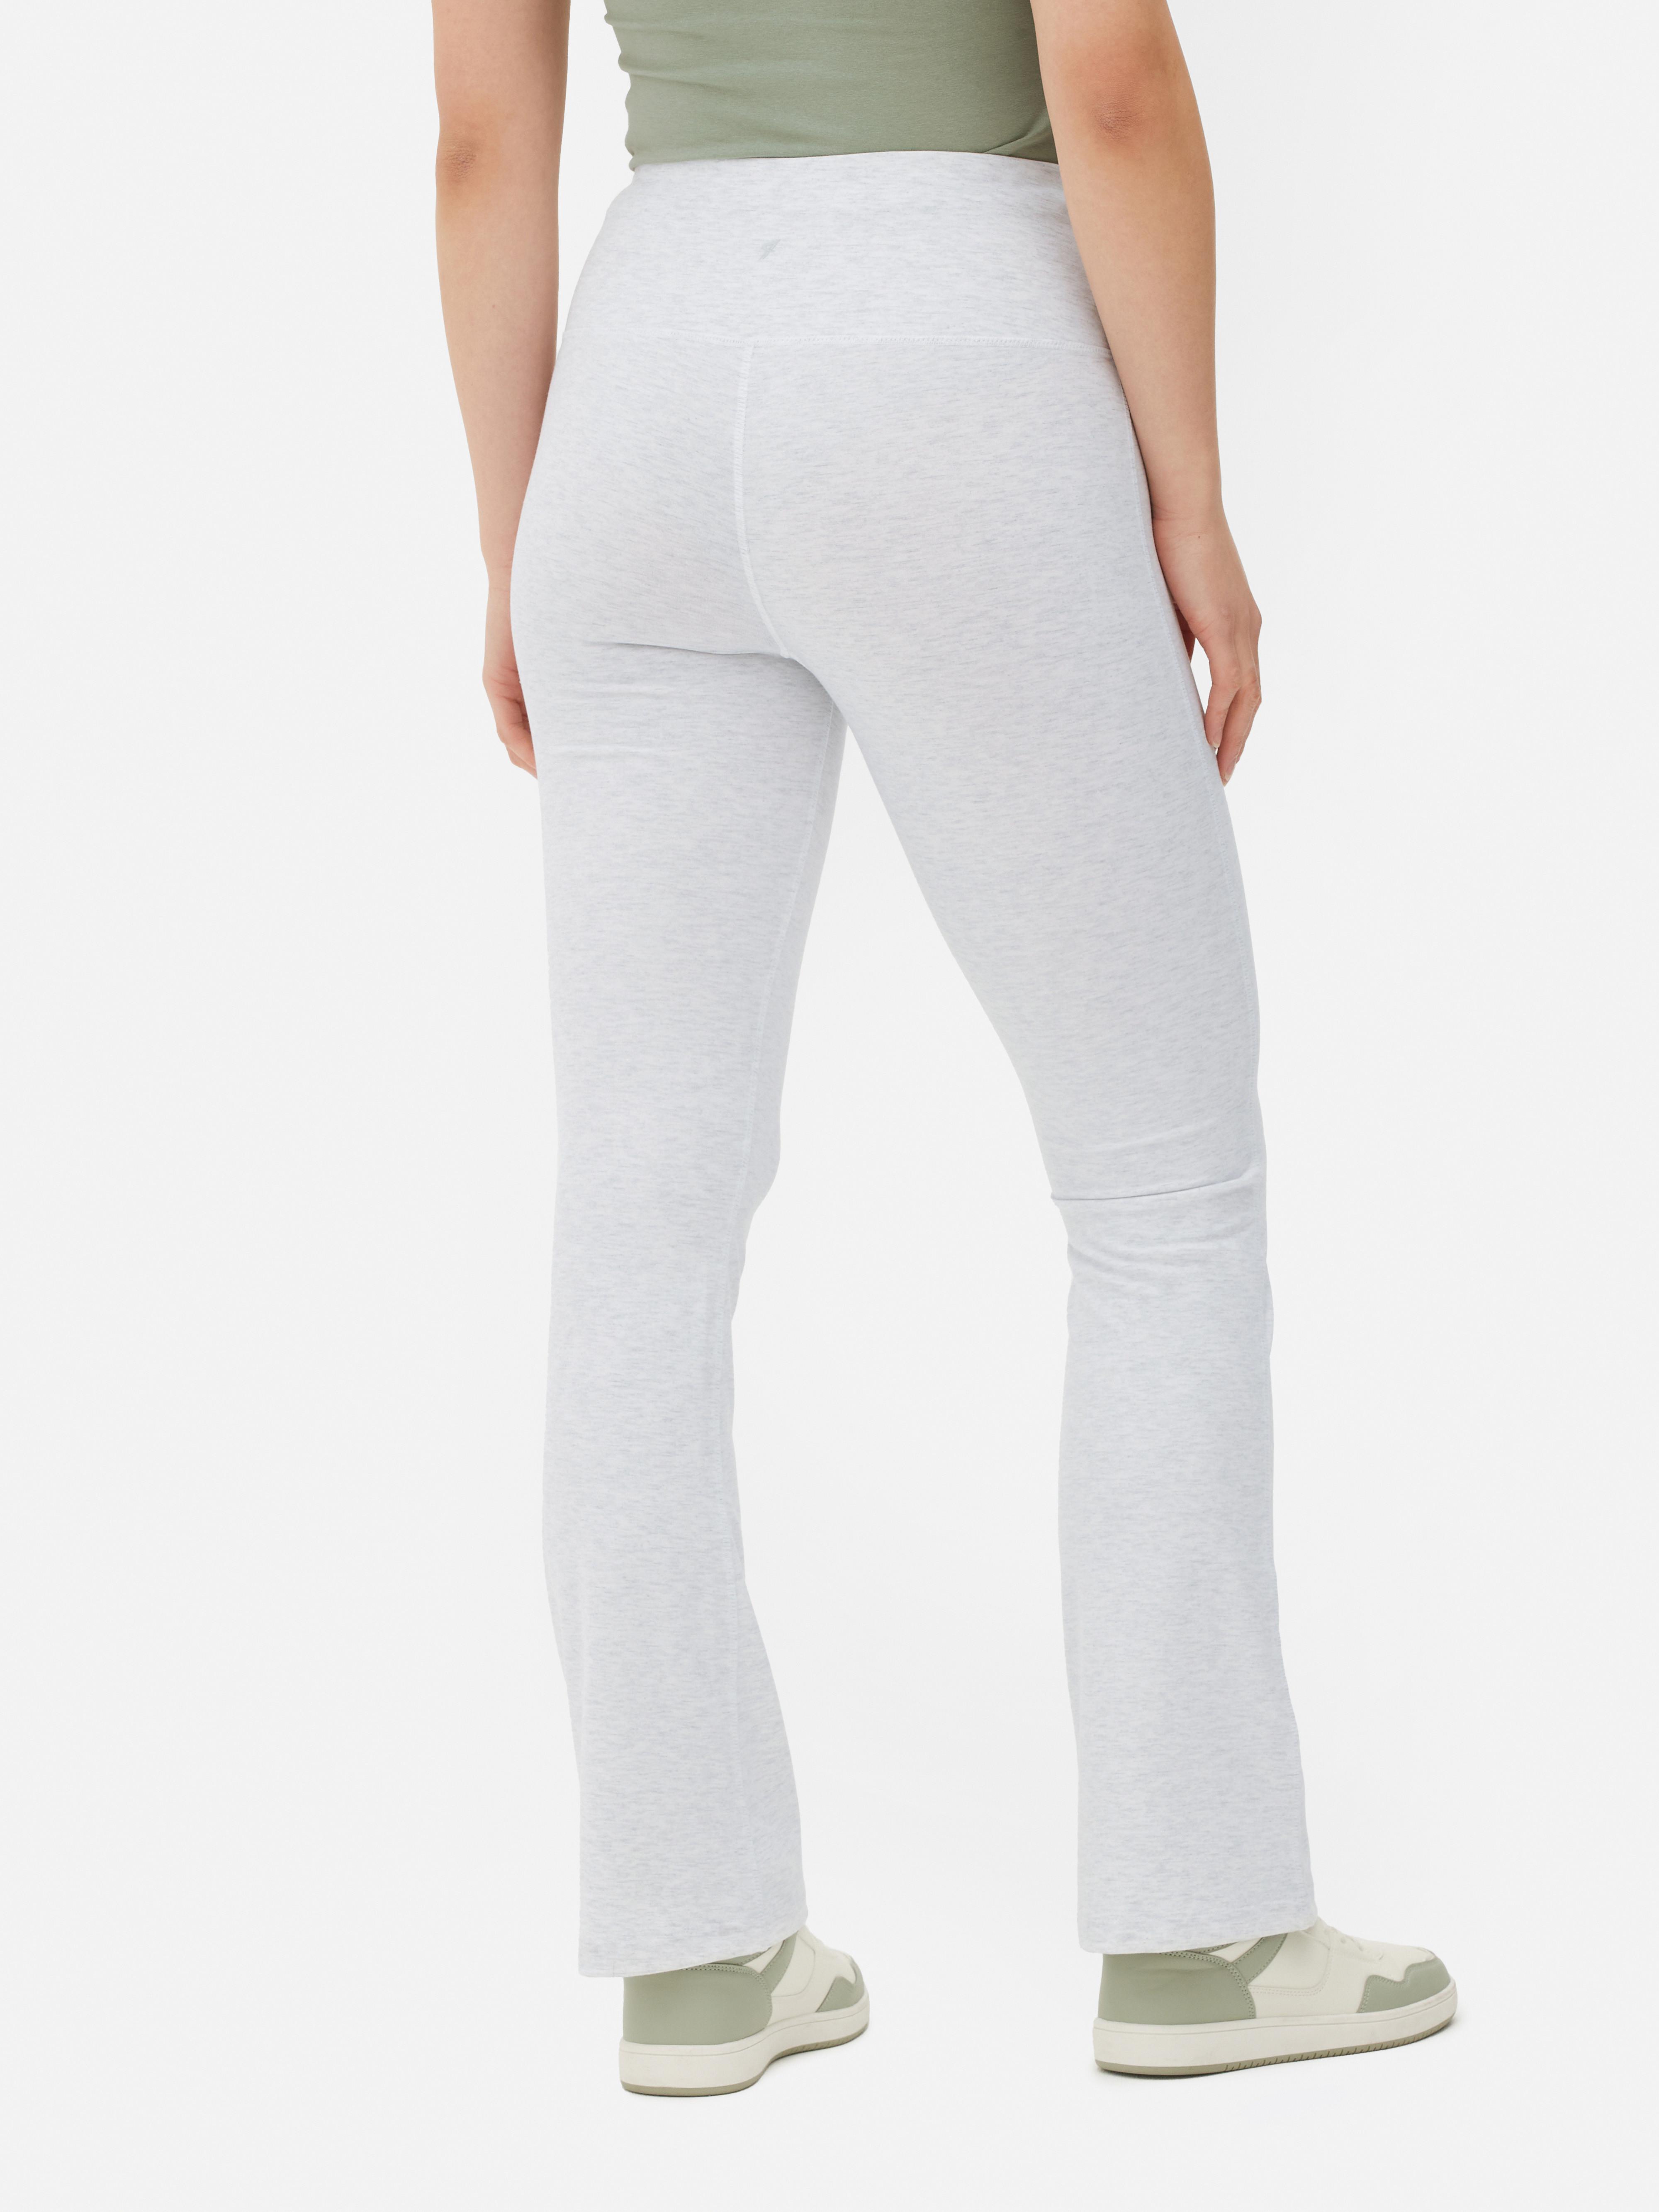 Slim Fit Womens Flare Primark Fleece Leggings With Bell Bottom For Casual  Lounge, Yoga, And Sweatpants From Minluzhu, $15.07